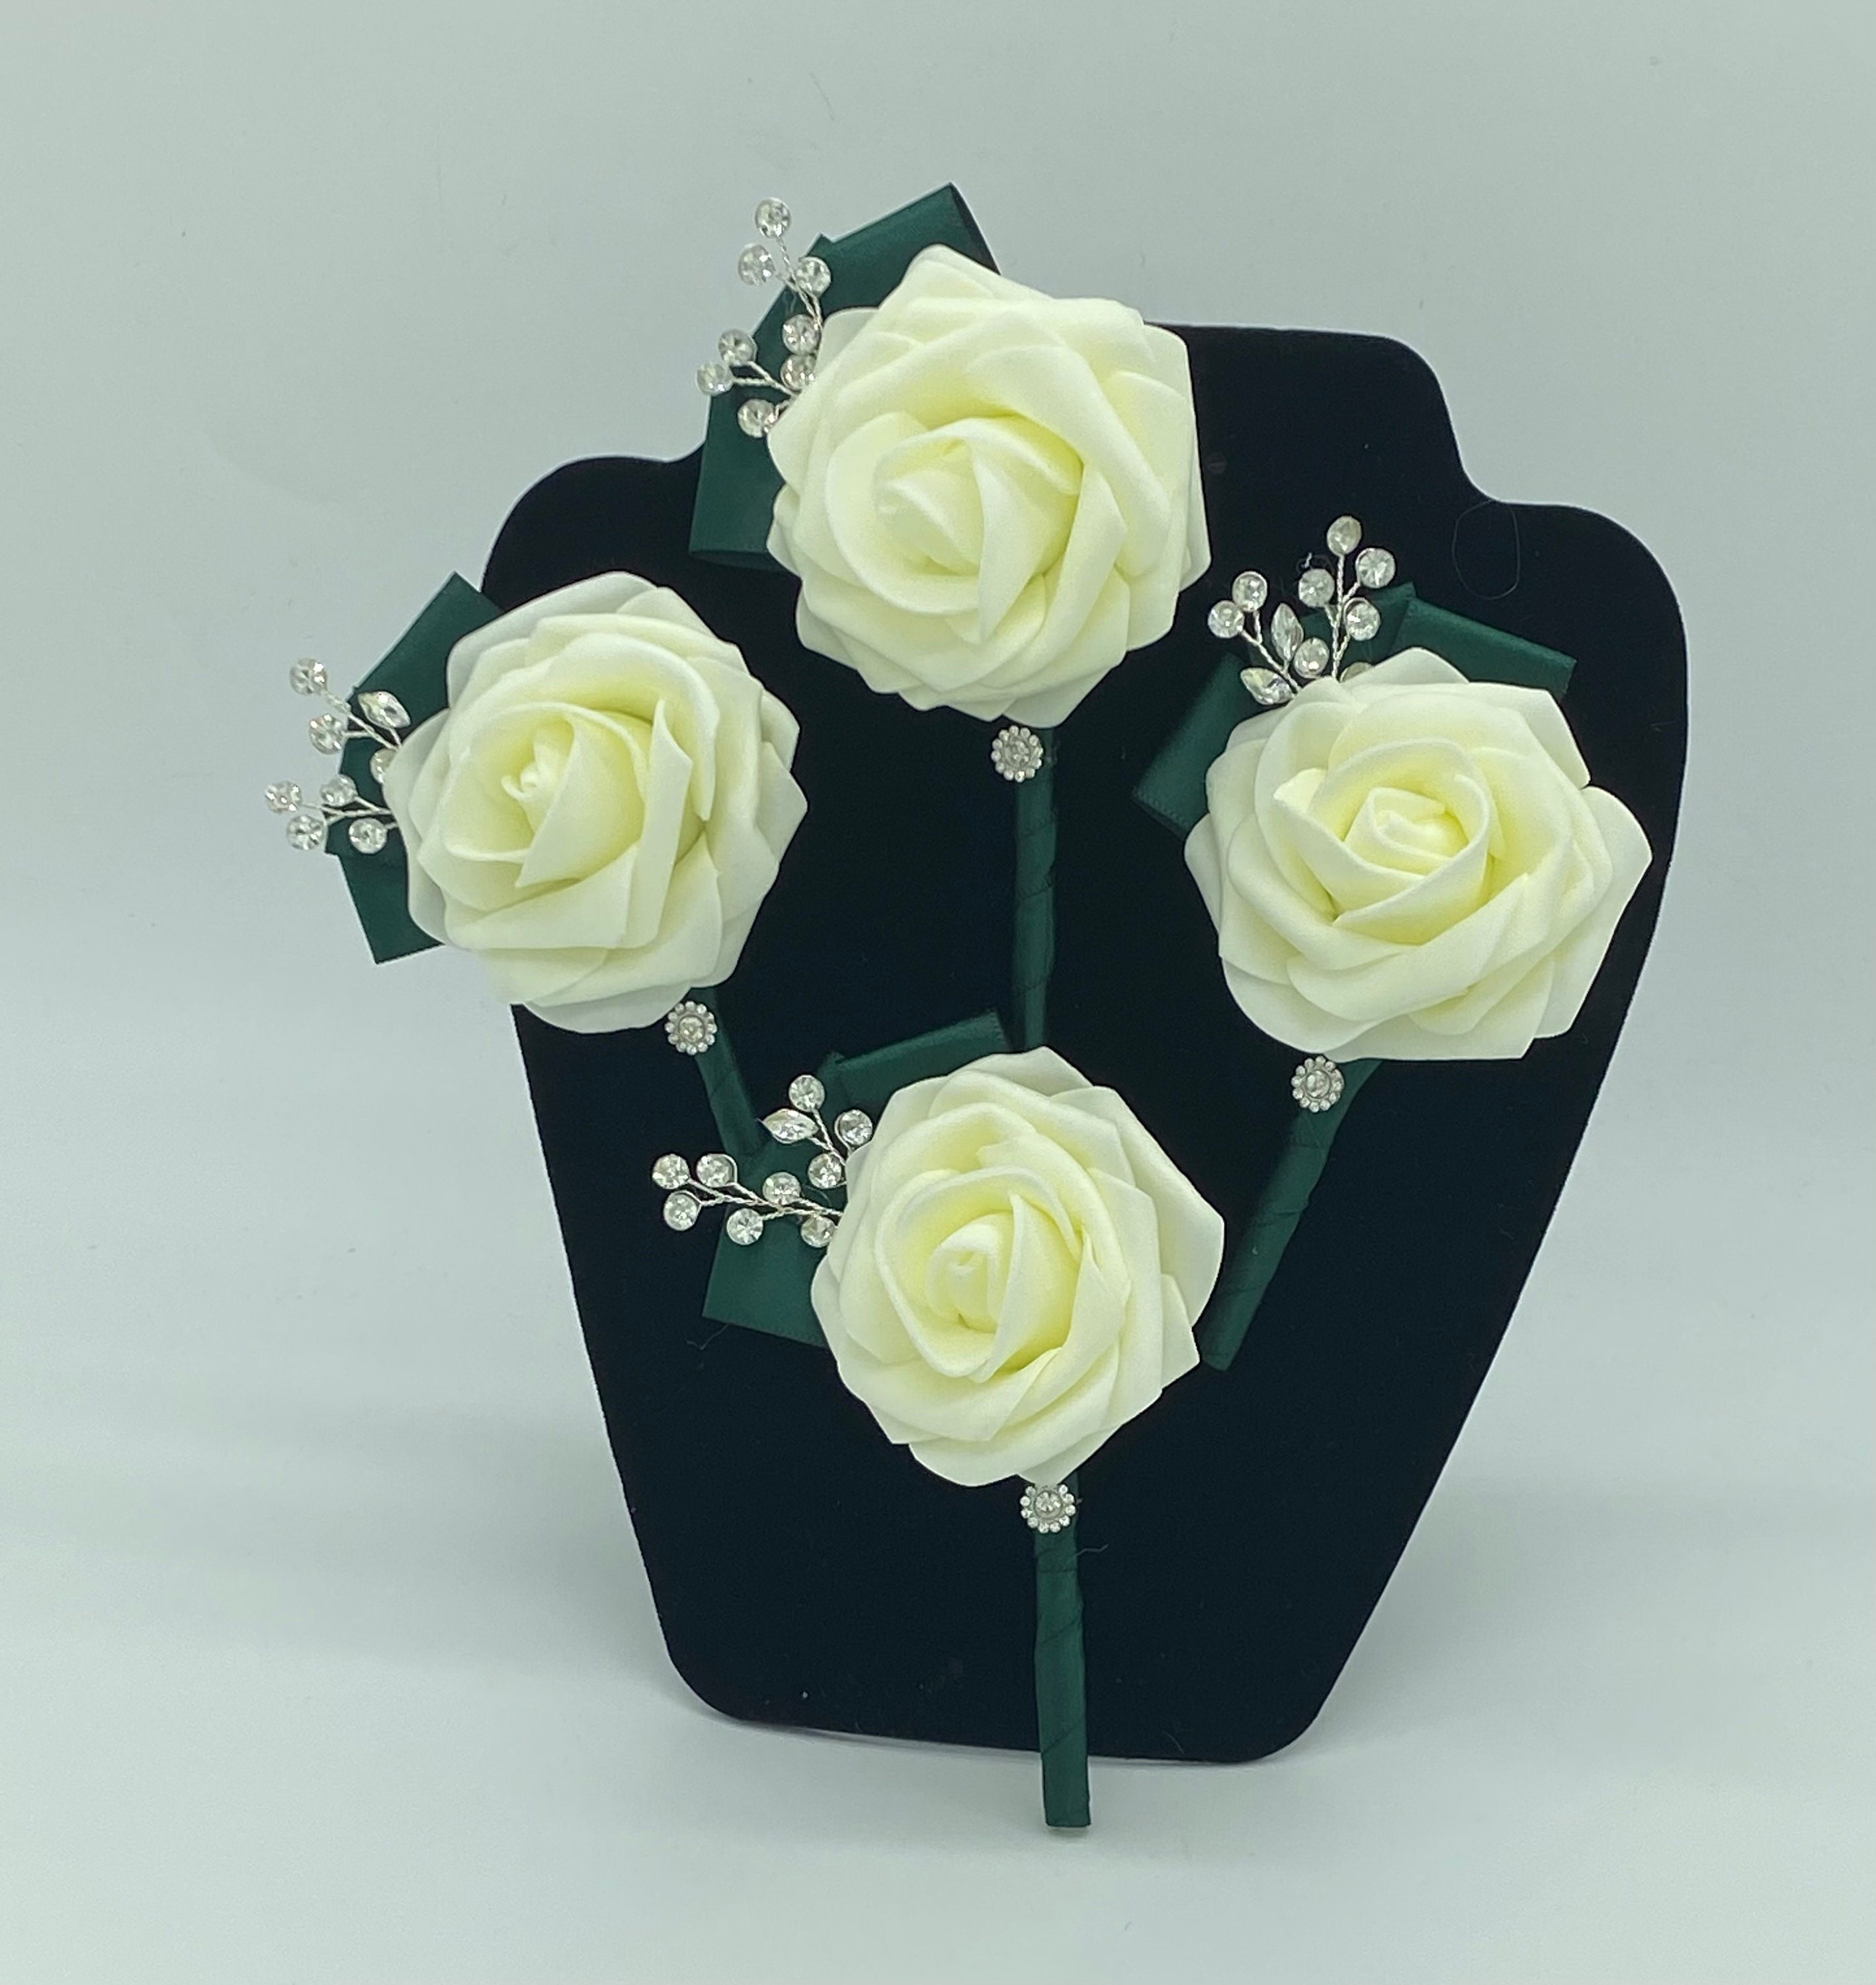 CB-007 ~ Made to Order Emerald Green & Ivory Real Touch Roses Brooch B –  Bouquets by Nicole